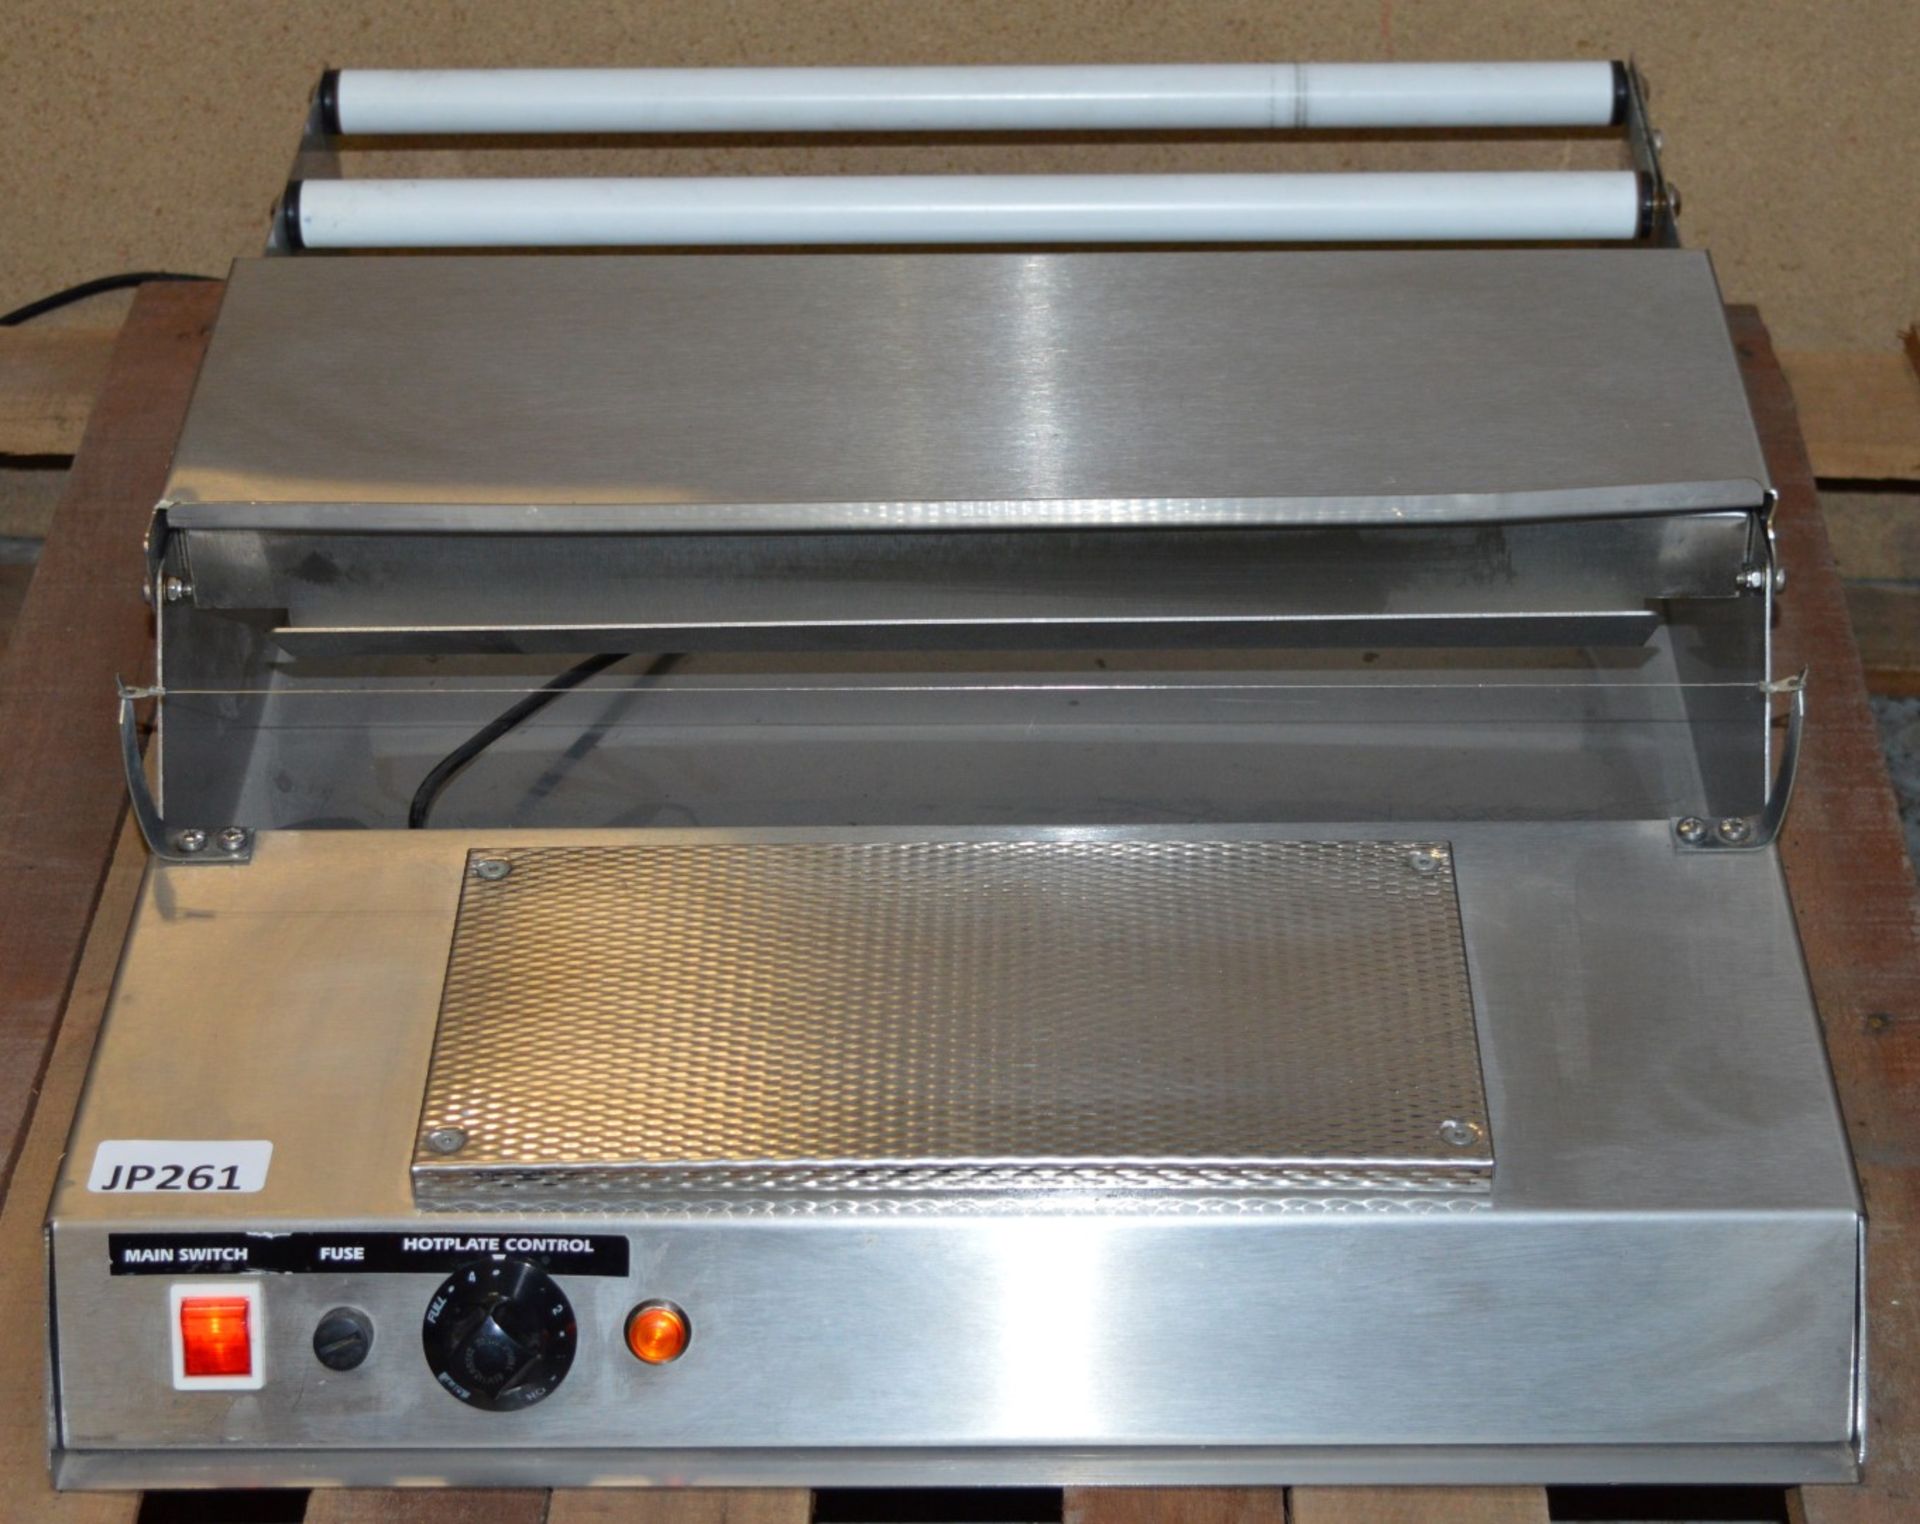 1 x Desktop Stretch Wrap Tray Overwrapper Machine - Stainless Steel Constructons With Hotplate